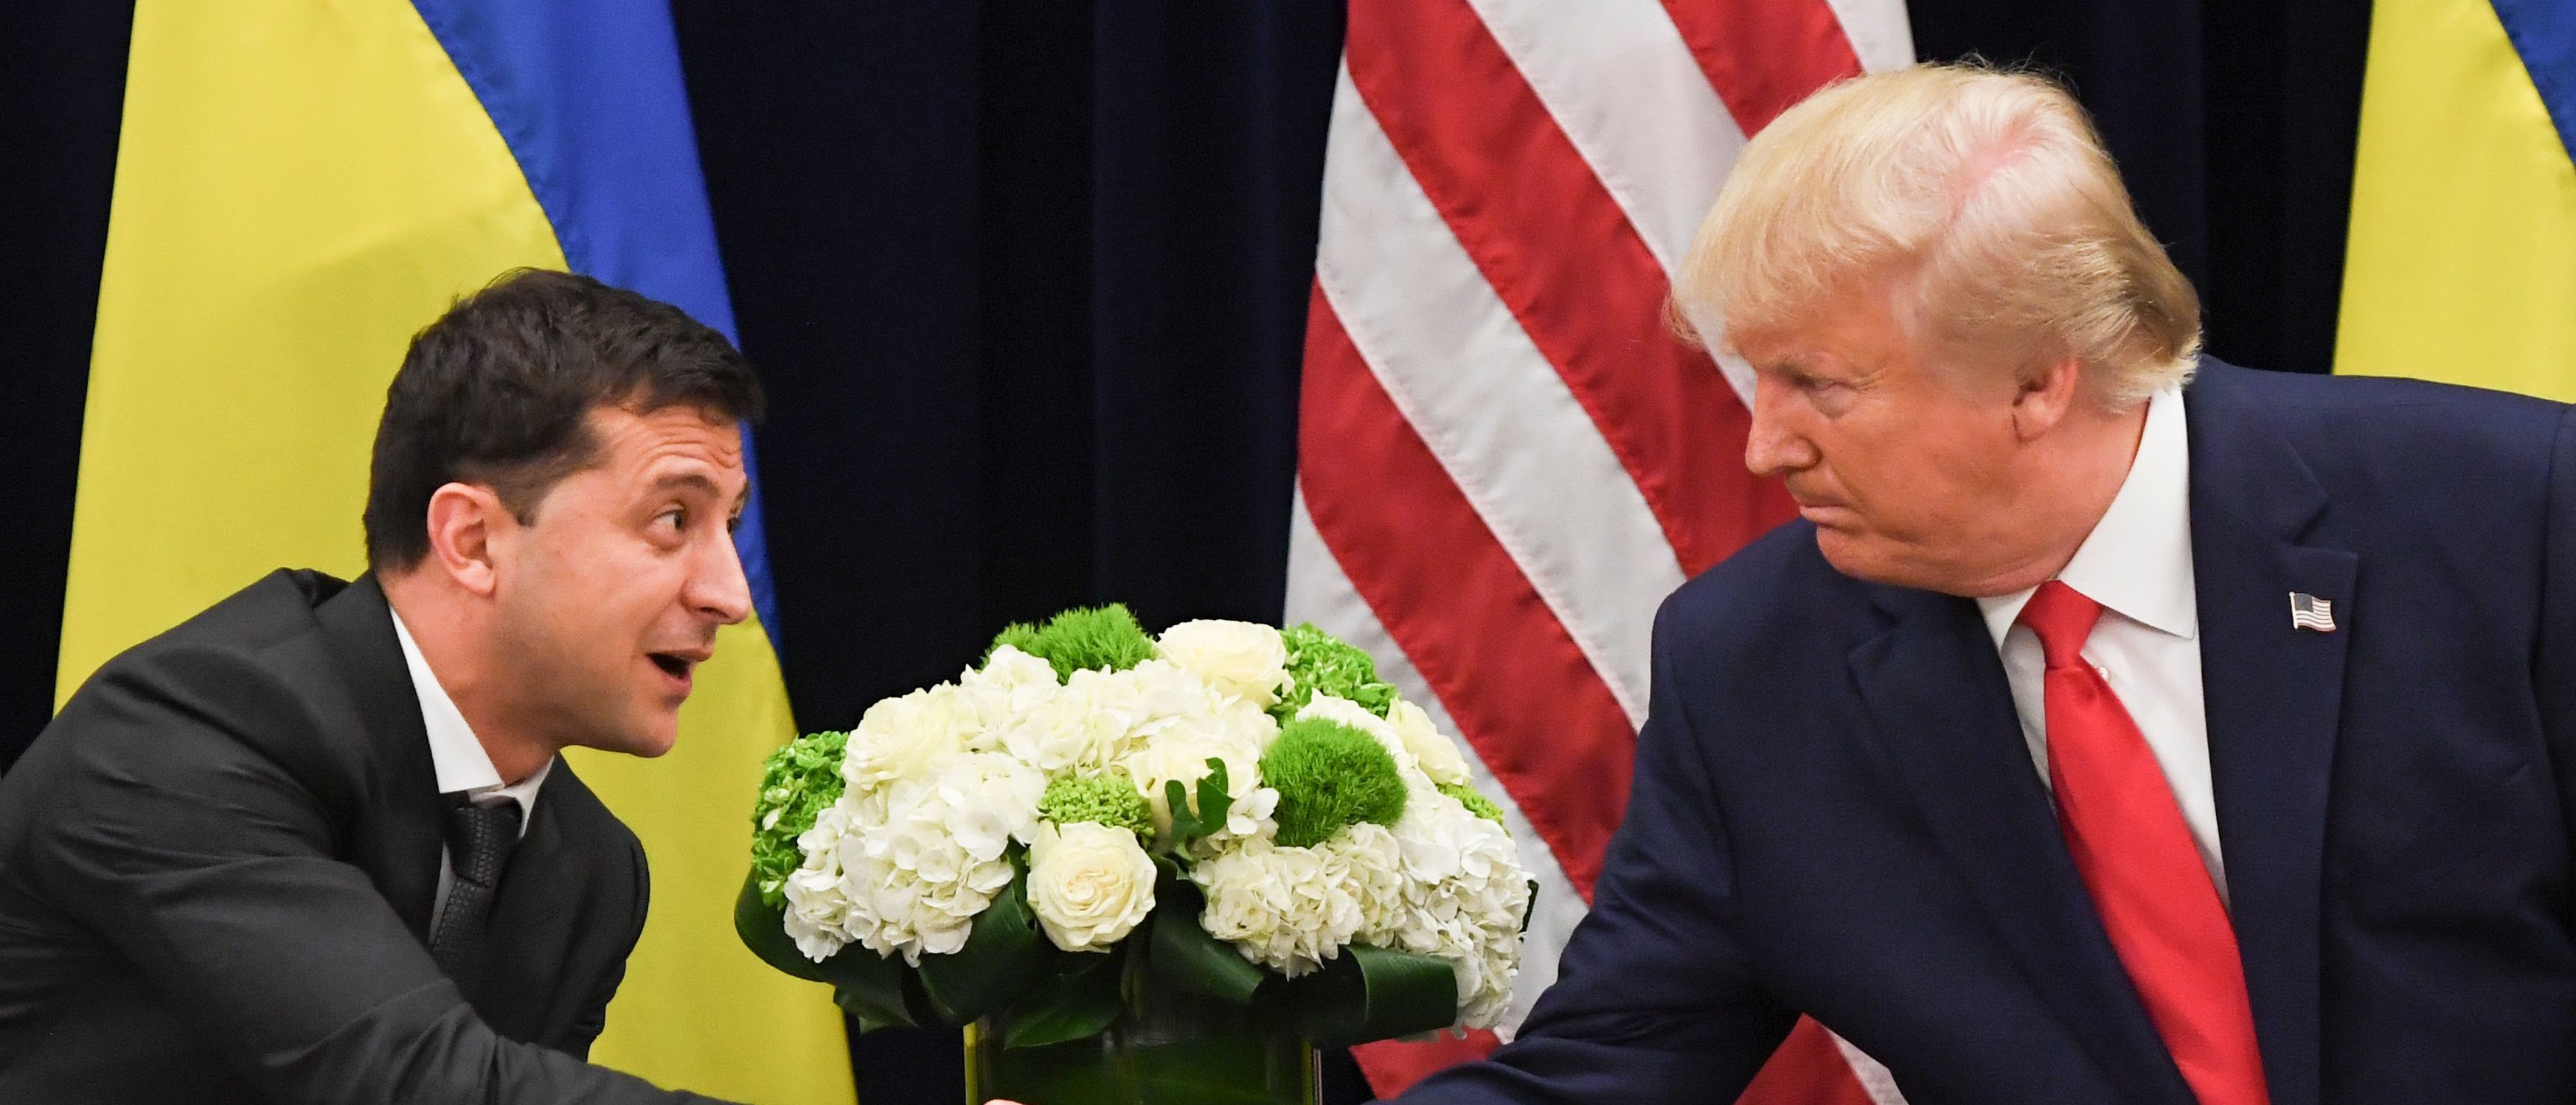 U.S. President Donald Trump and Ukrainian President Volodymyr Zelensky shake hands during a meeting in New York on Sept. 25, 2019. (SAUL LOEB/AFP via Getty Images)